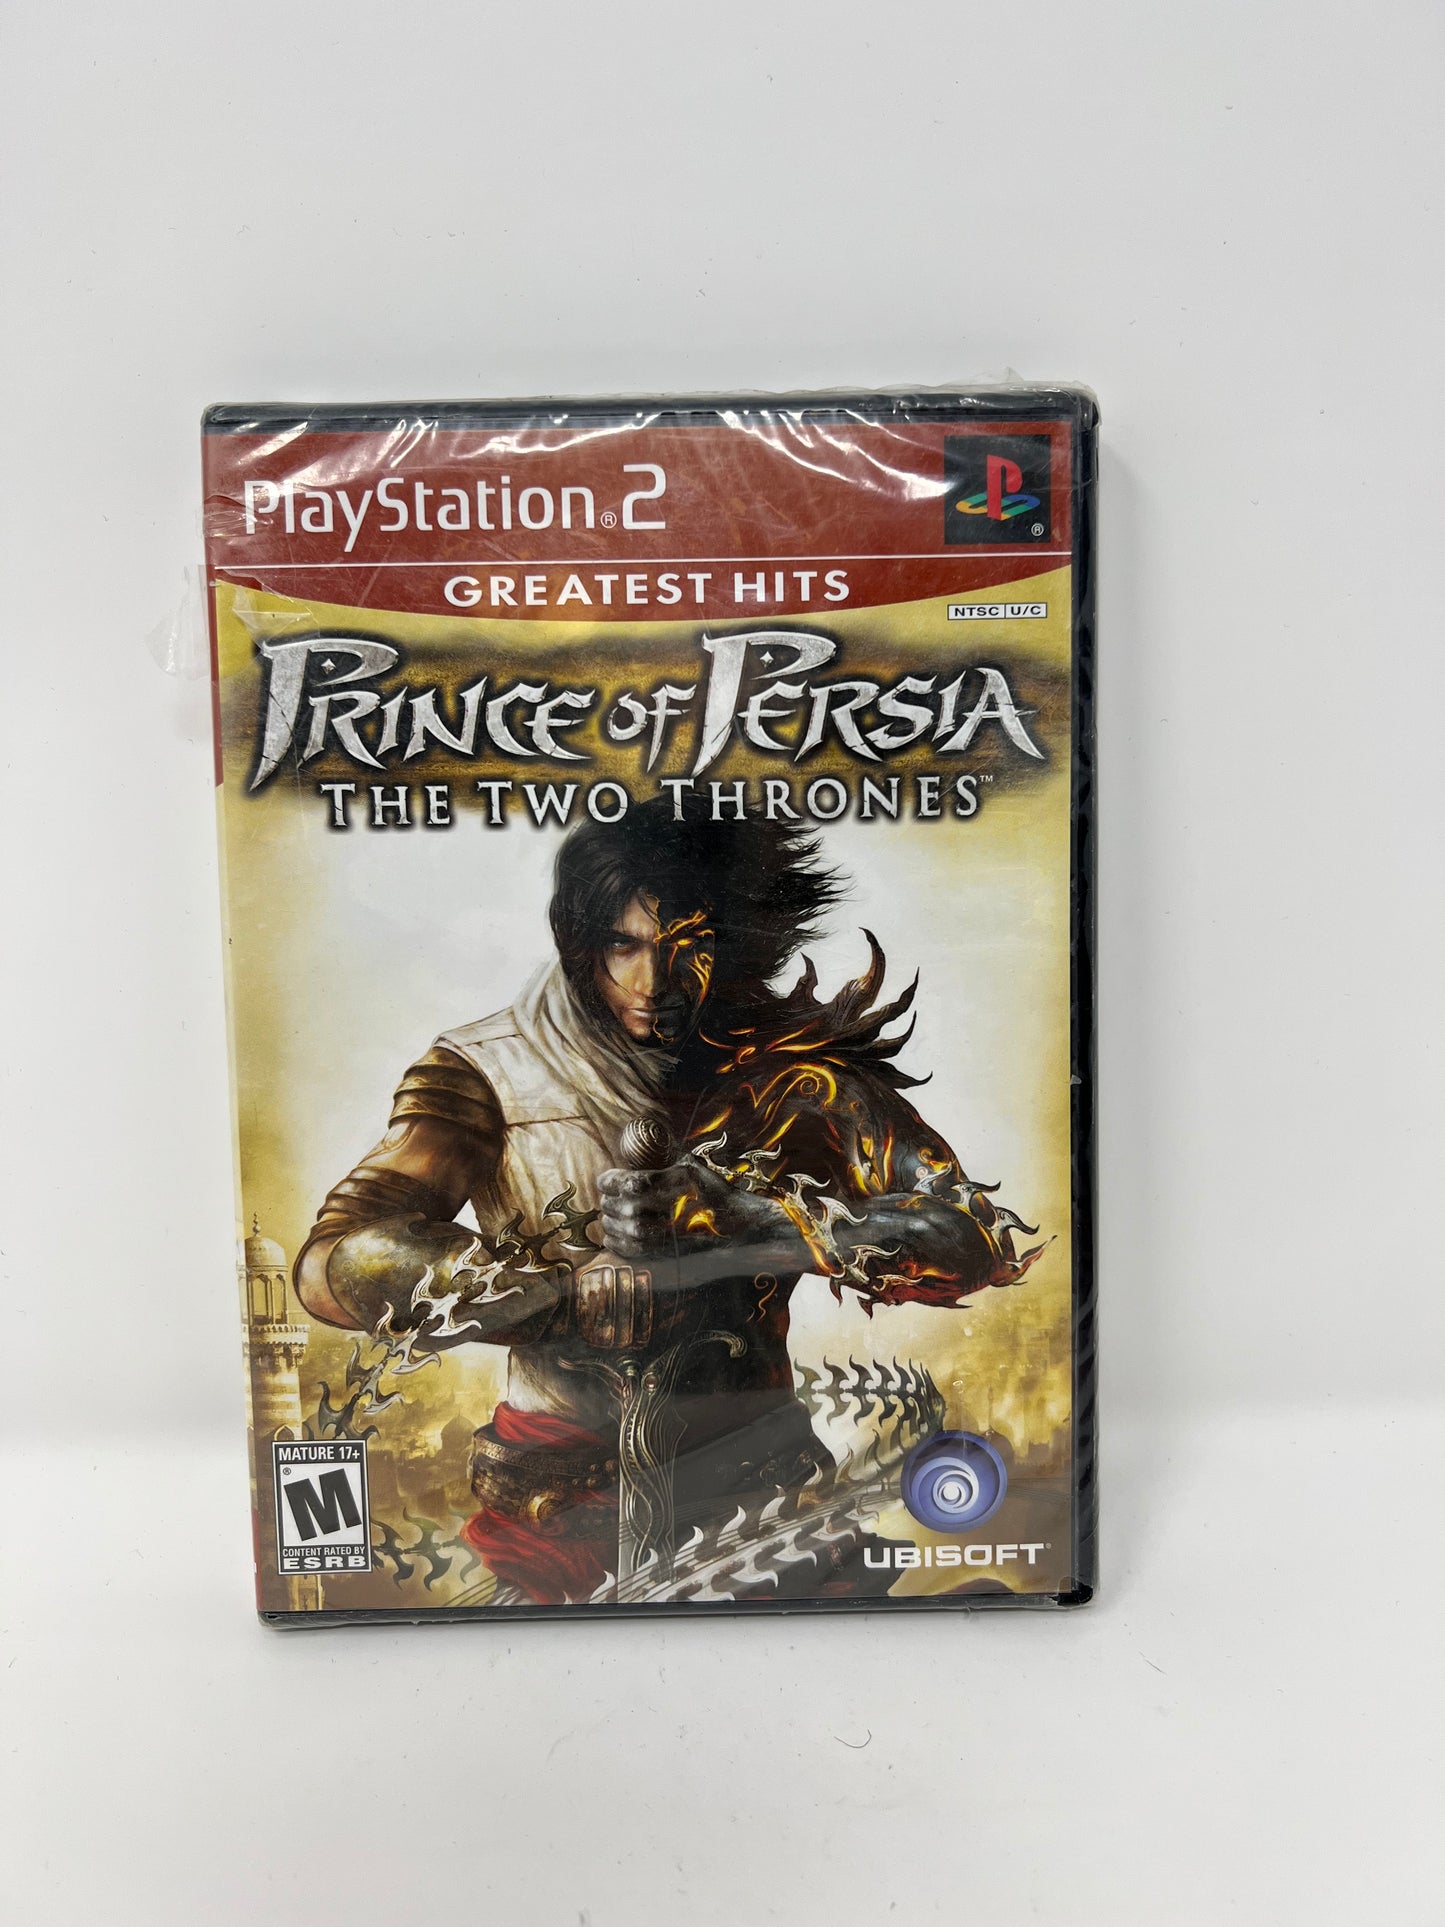 Prince of Persia The Two Thrones (Greatest Hits) - PS2 Game - Used